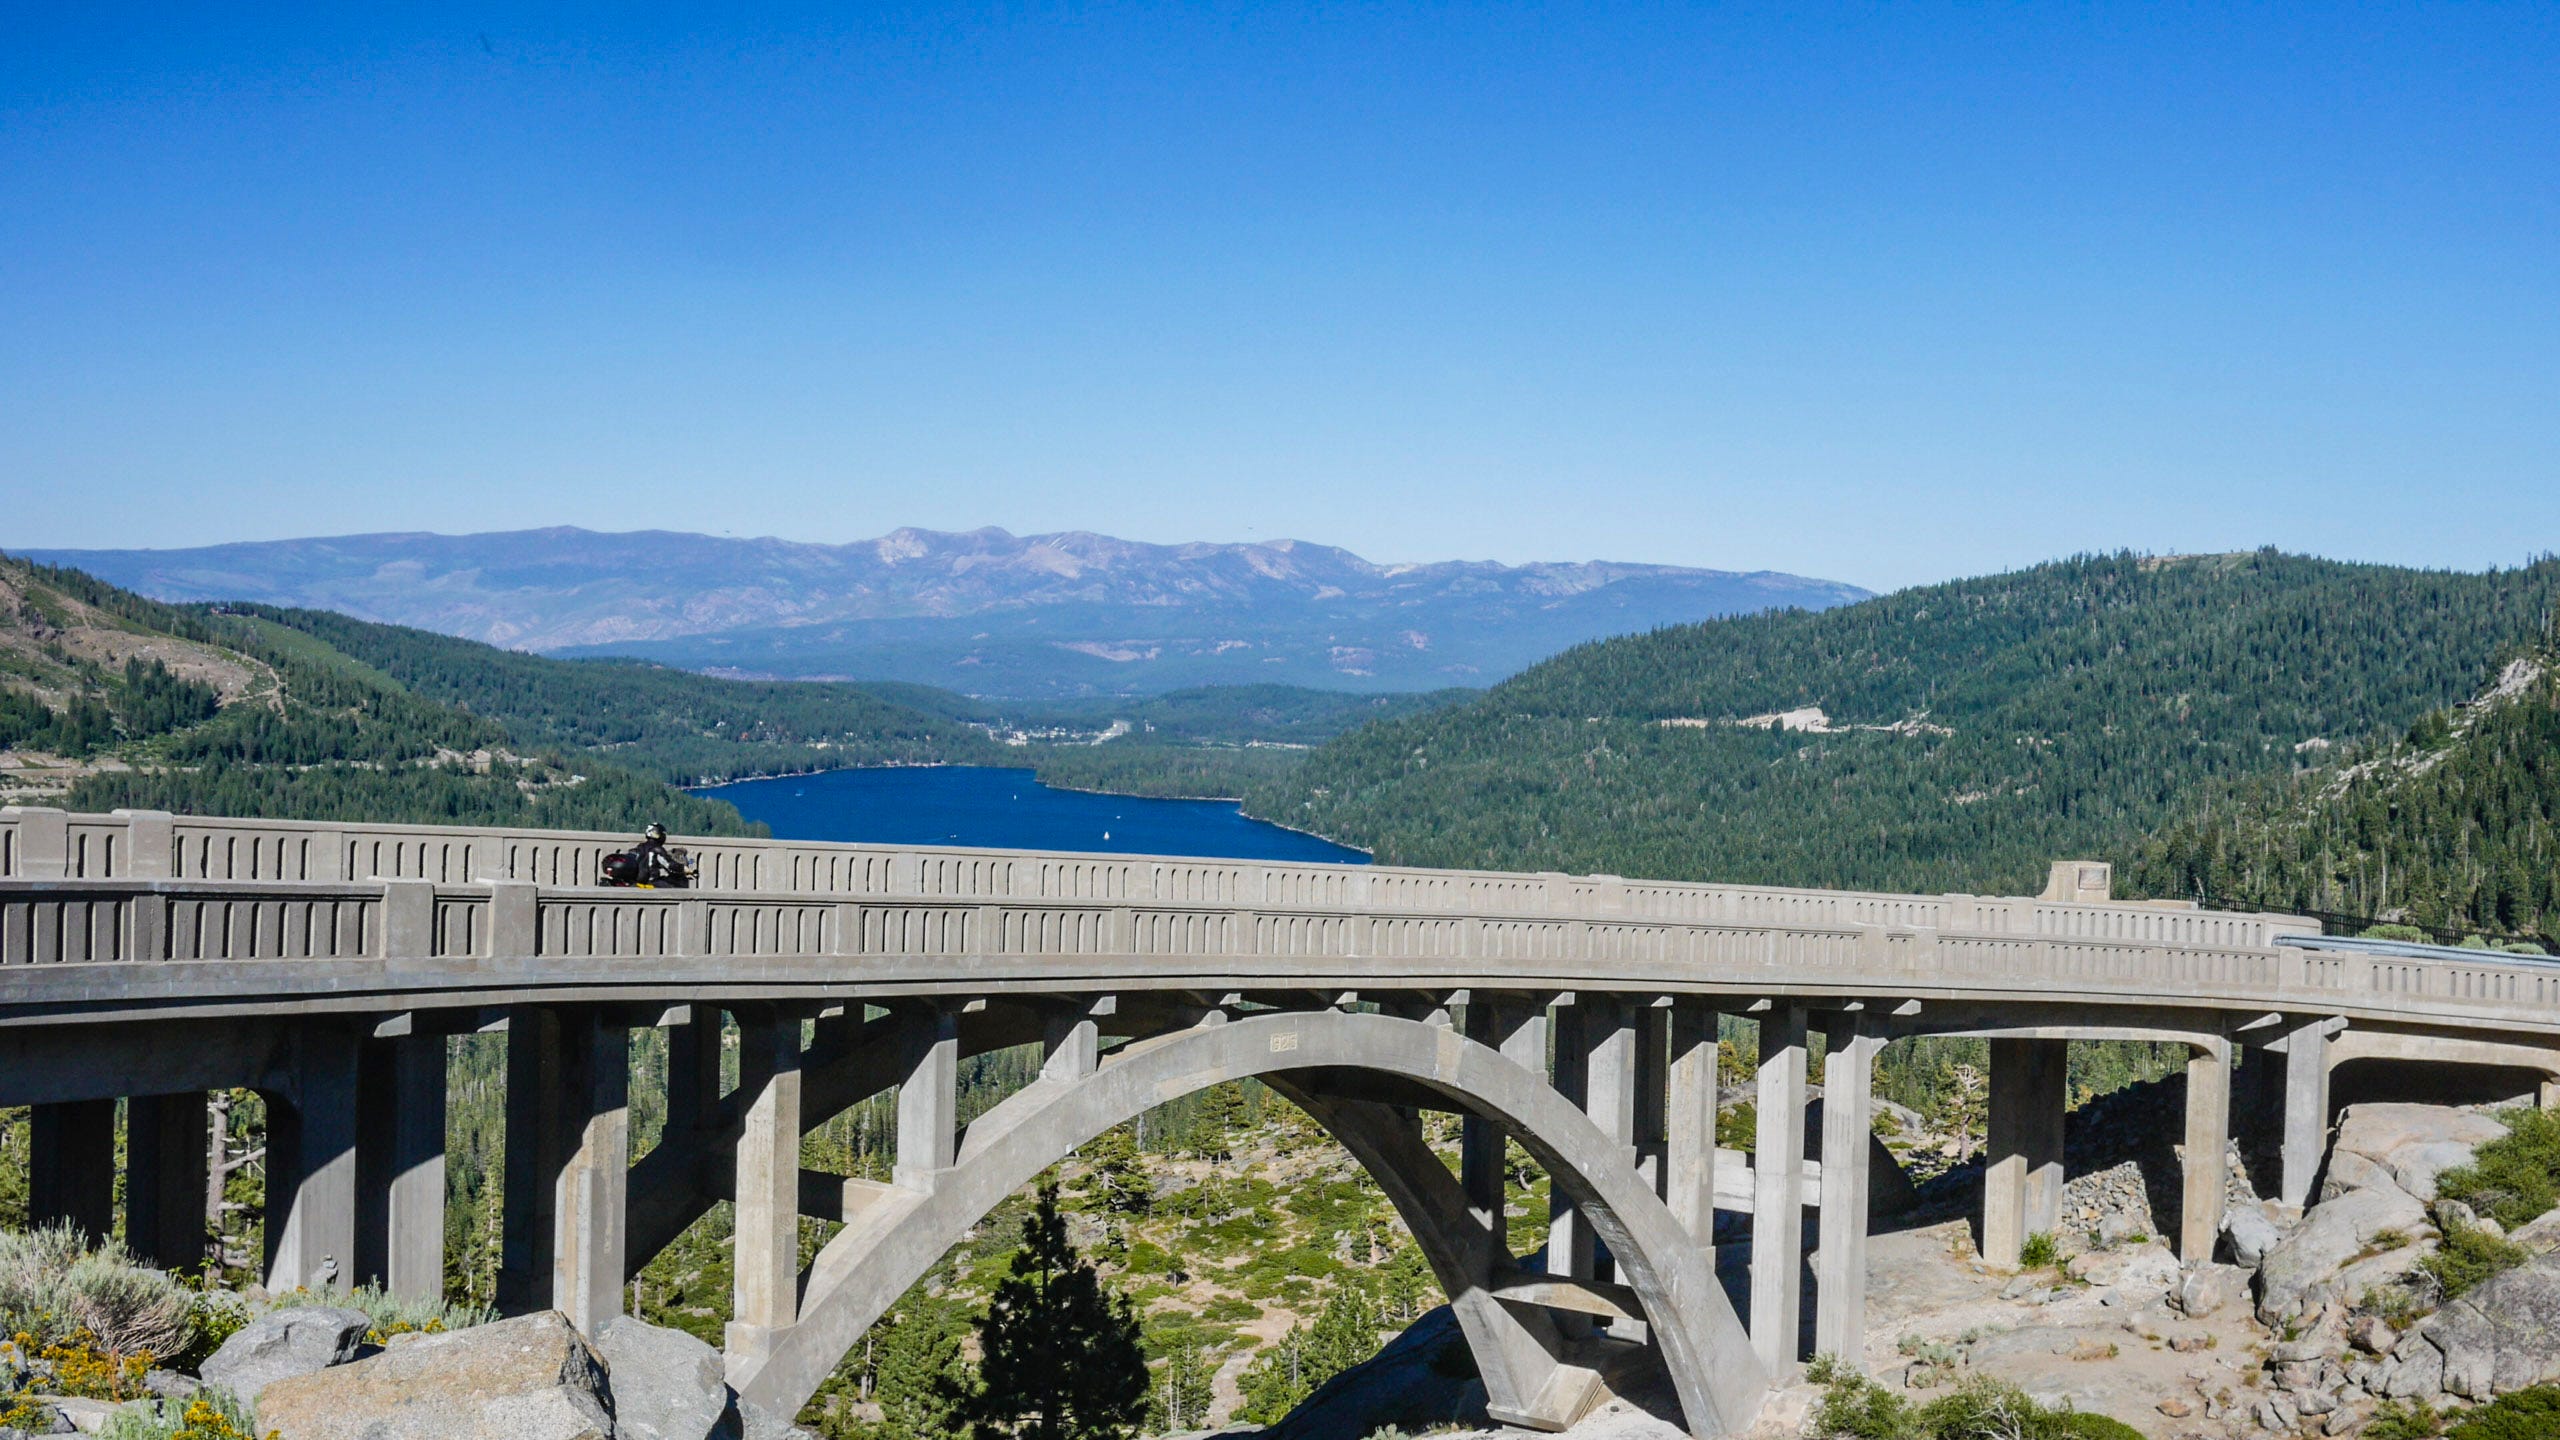 An older arched concrete bridge crosses a rocky chasm from the left and descending to the right. A lone motorcyclist descends on the bridge. Beyond, the deep blue waters of Donner Lake are framed by rolling green mountains. And in the hazy distance lie more purple mountains. On the mountain on the right, you can see a cut along the mountain that is the Transcontinental Railroad.